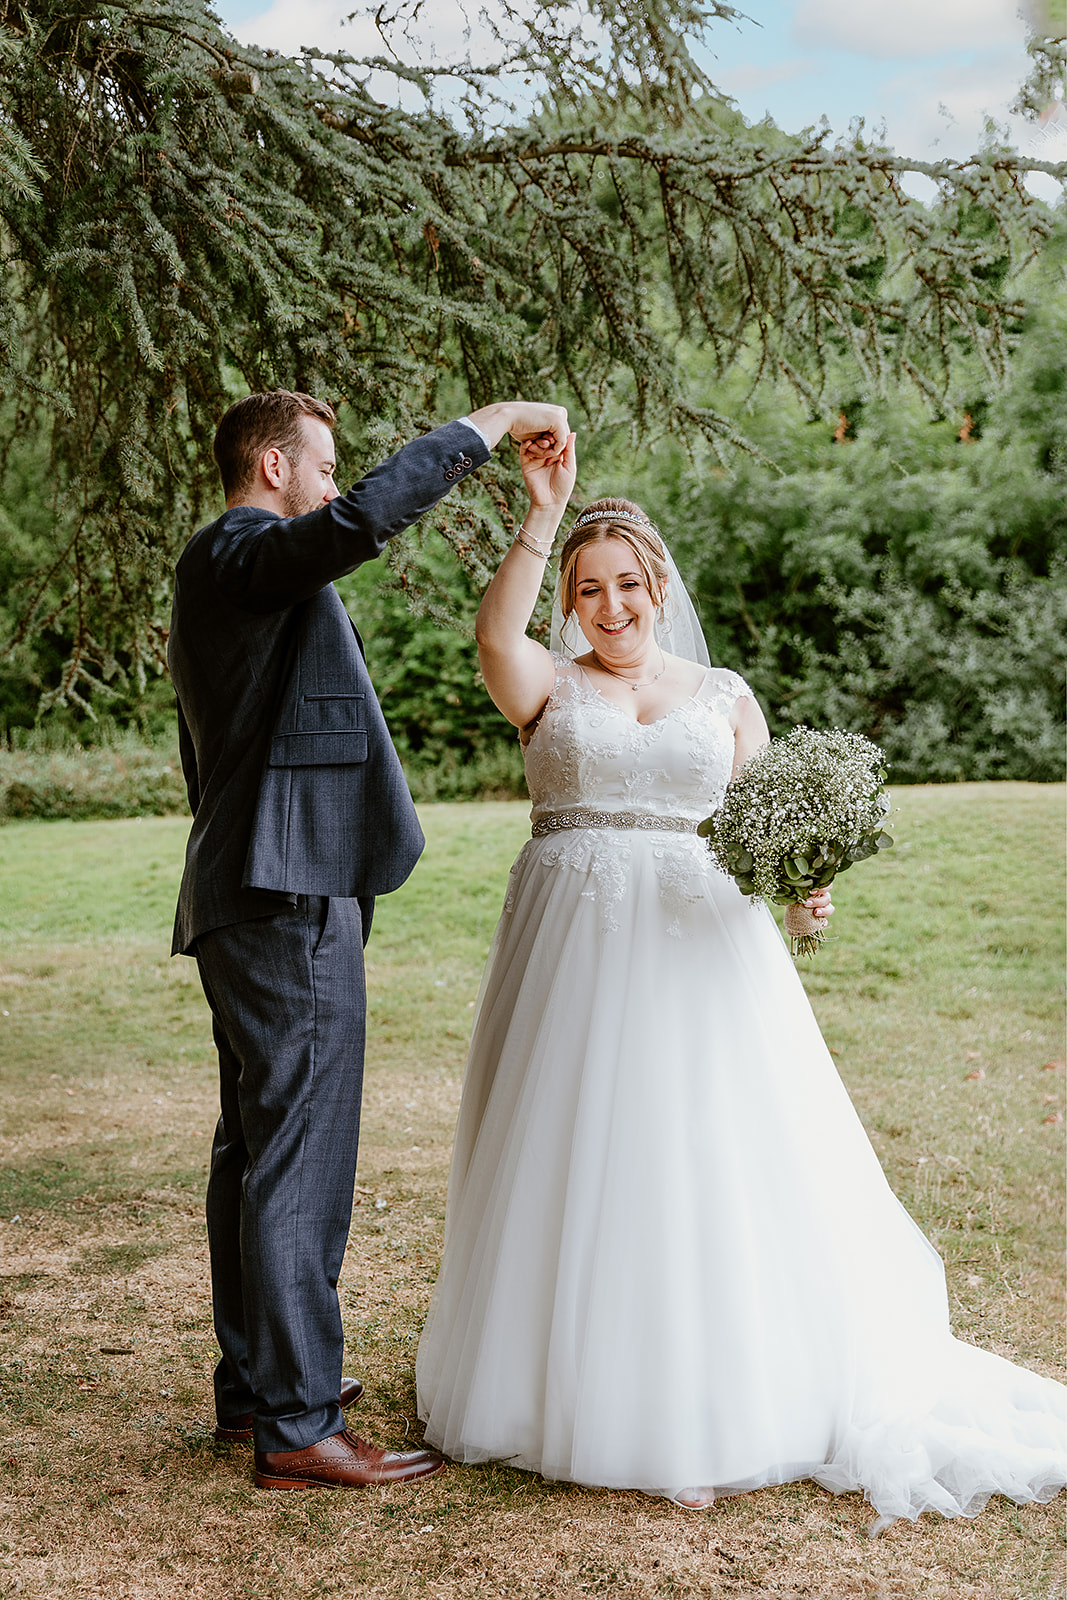 Bride and groom dancing outside at Pendley Manor, Tring. Wedding Photo by Perfect Memories photography